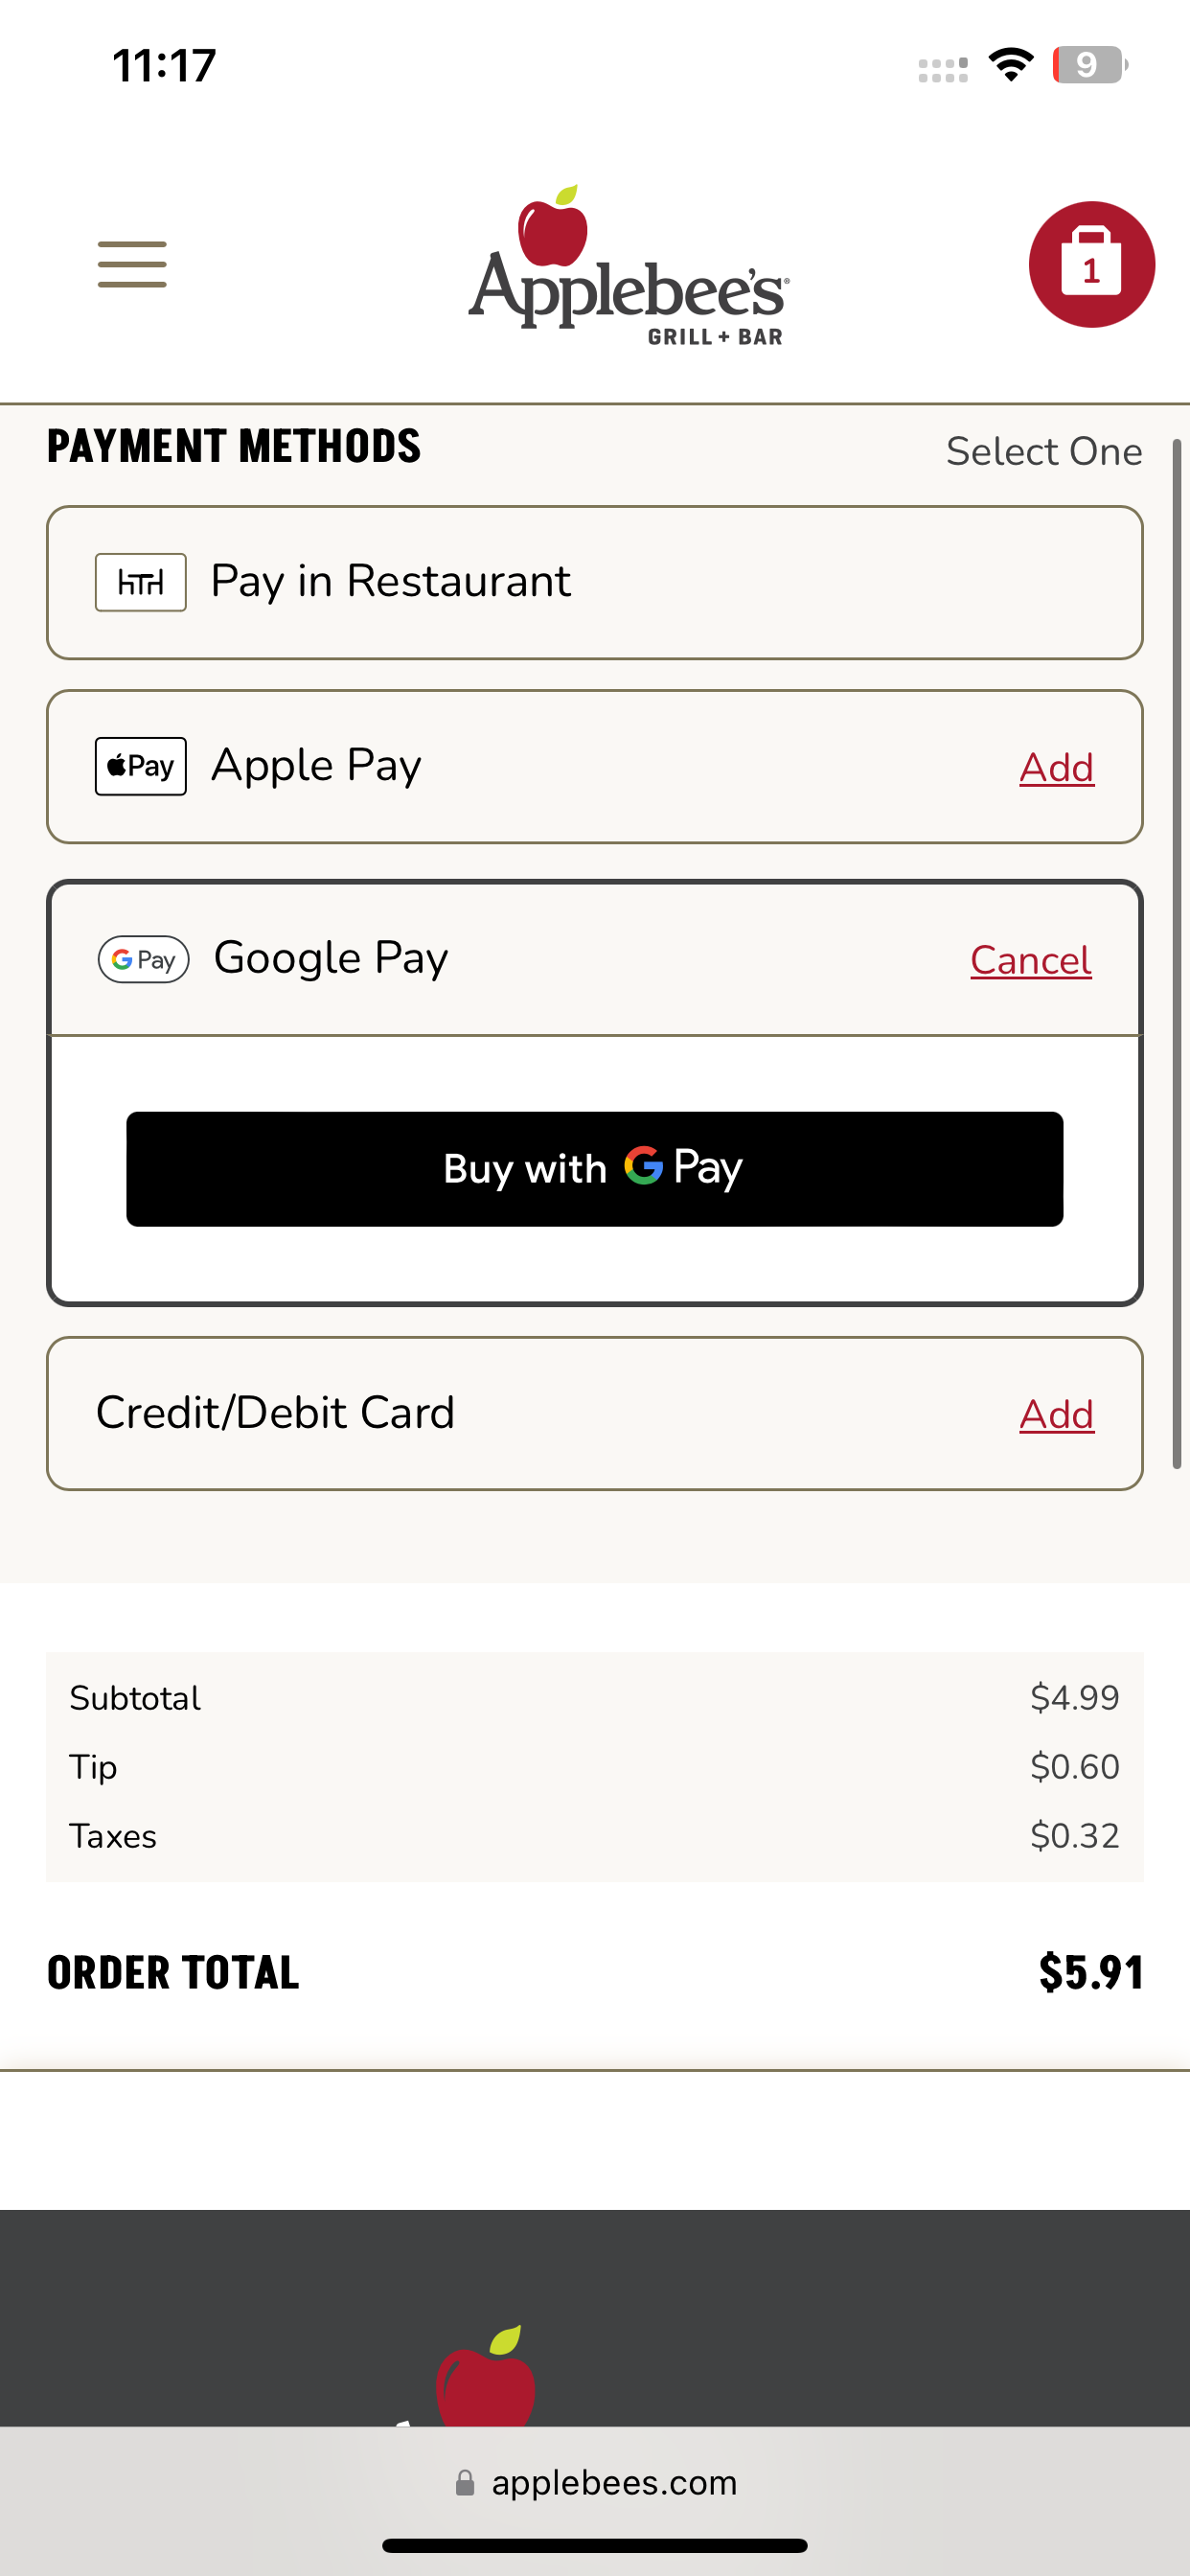 Applebee's accepts Google Pay & Apple Pay online.